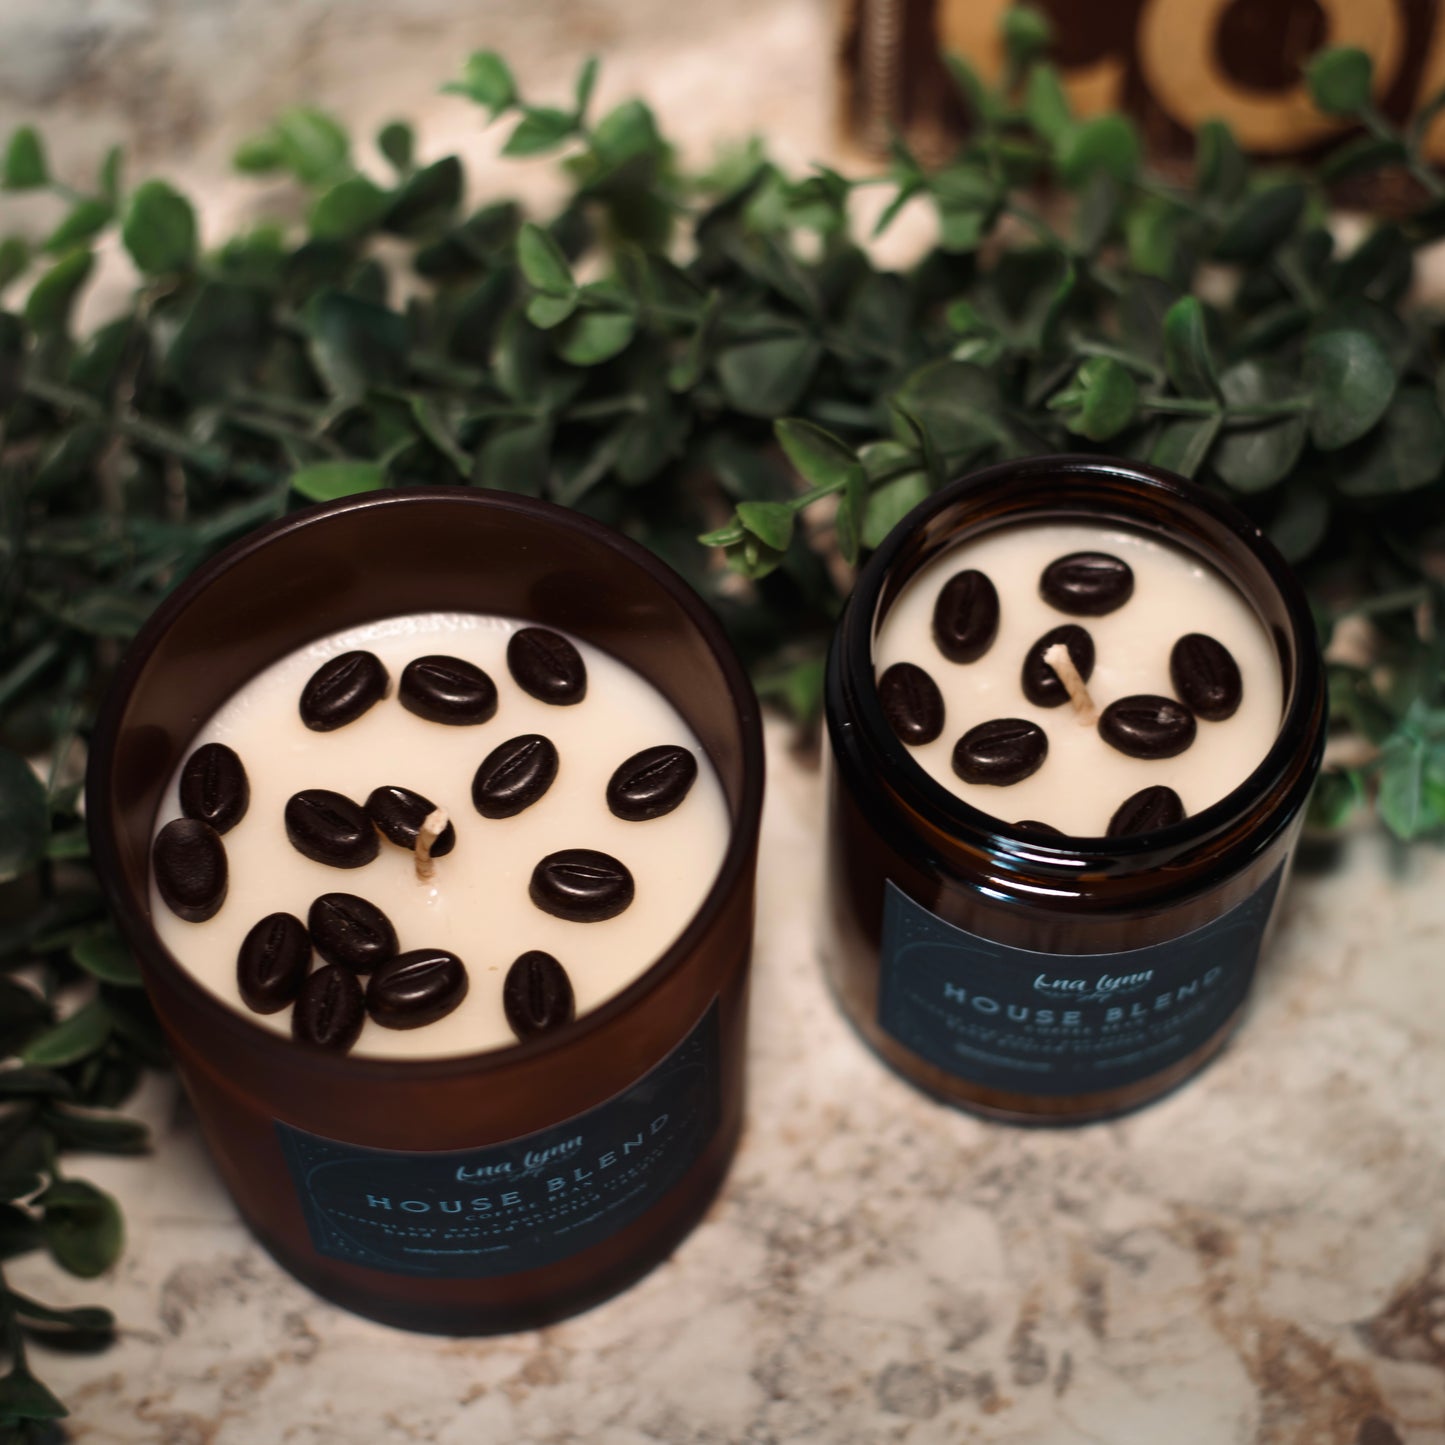 "House Blend" | Coffee Bean | Scented Candle